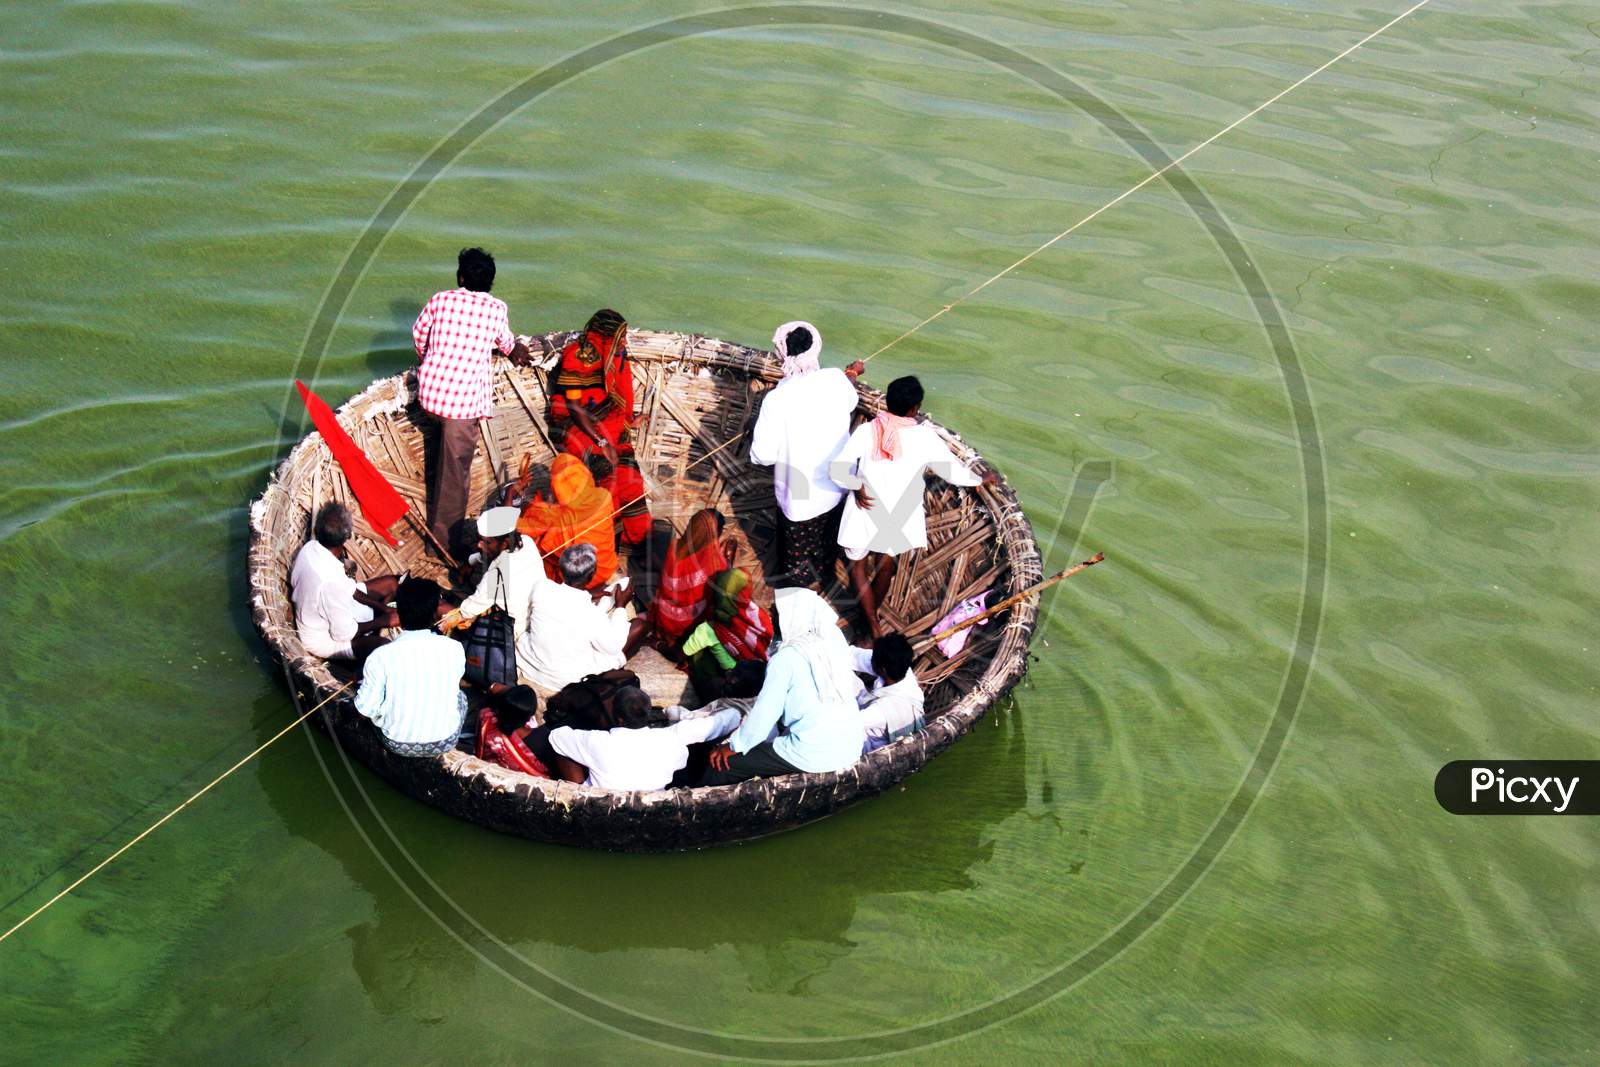 Villagers traveling in the wicker boat to cross the river